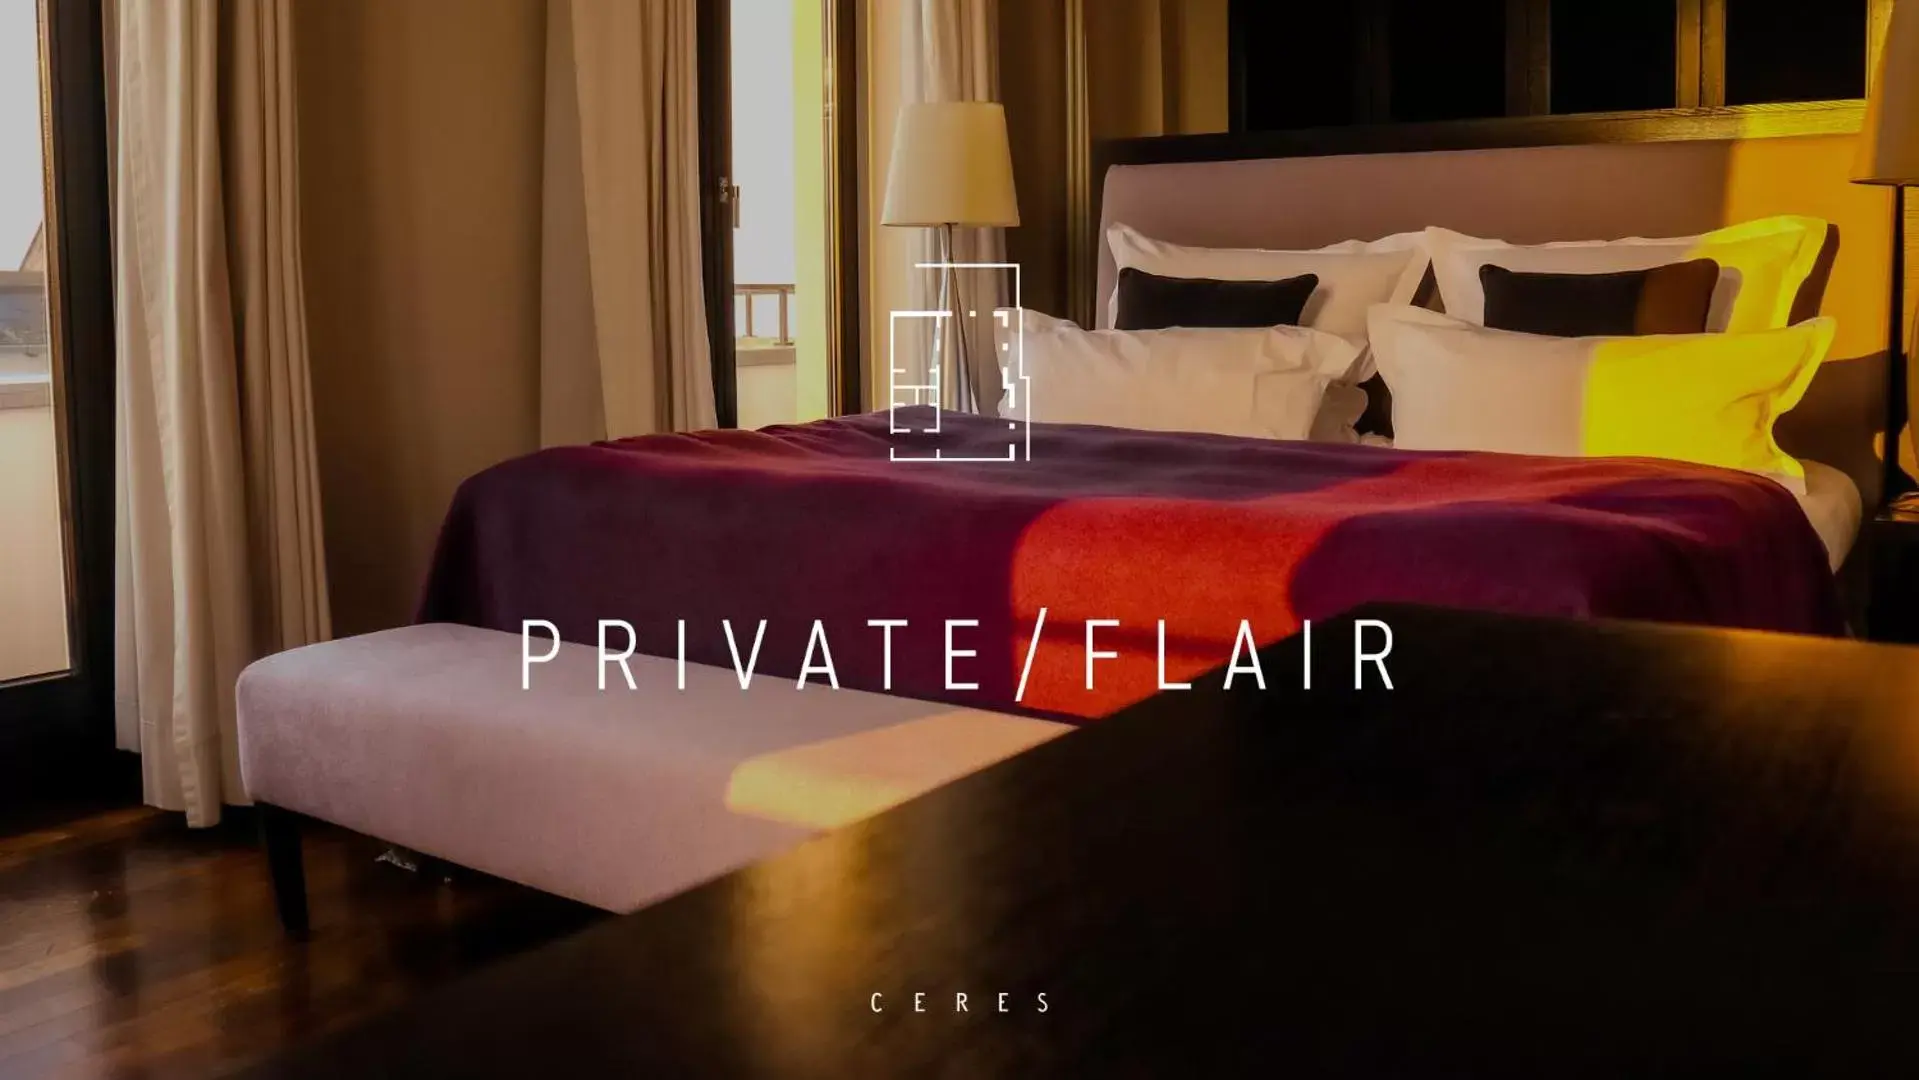 PRIVATE / FLAIR in CERES am Meer